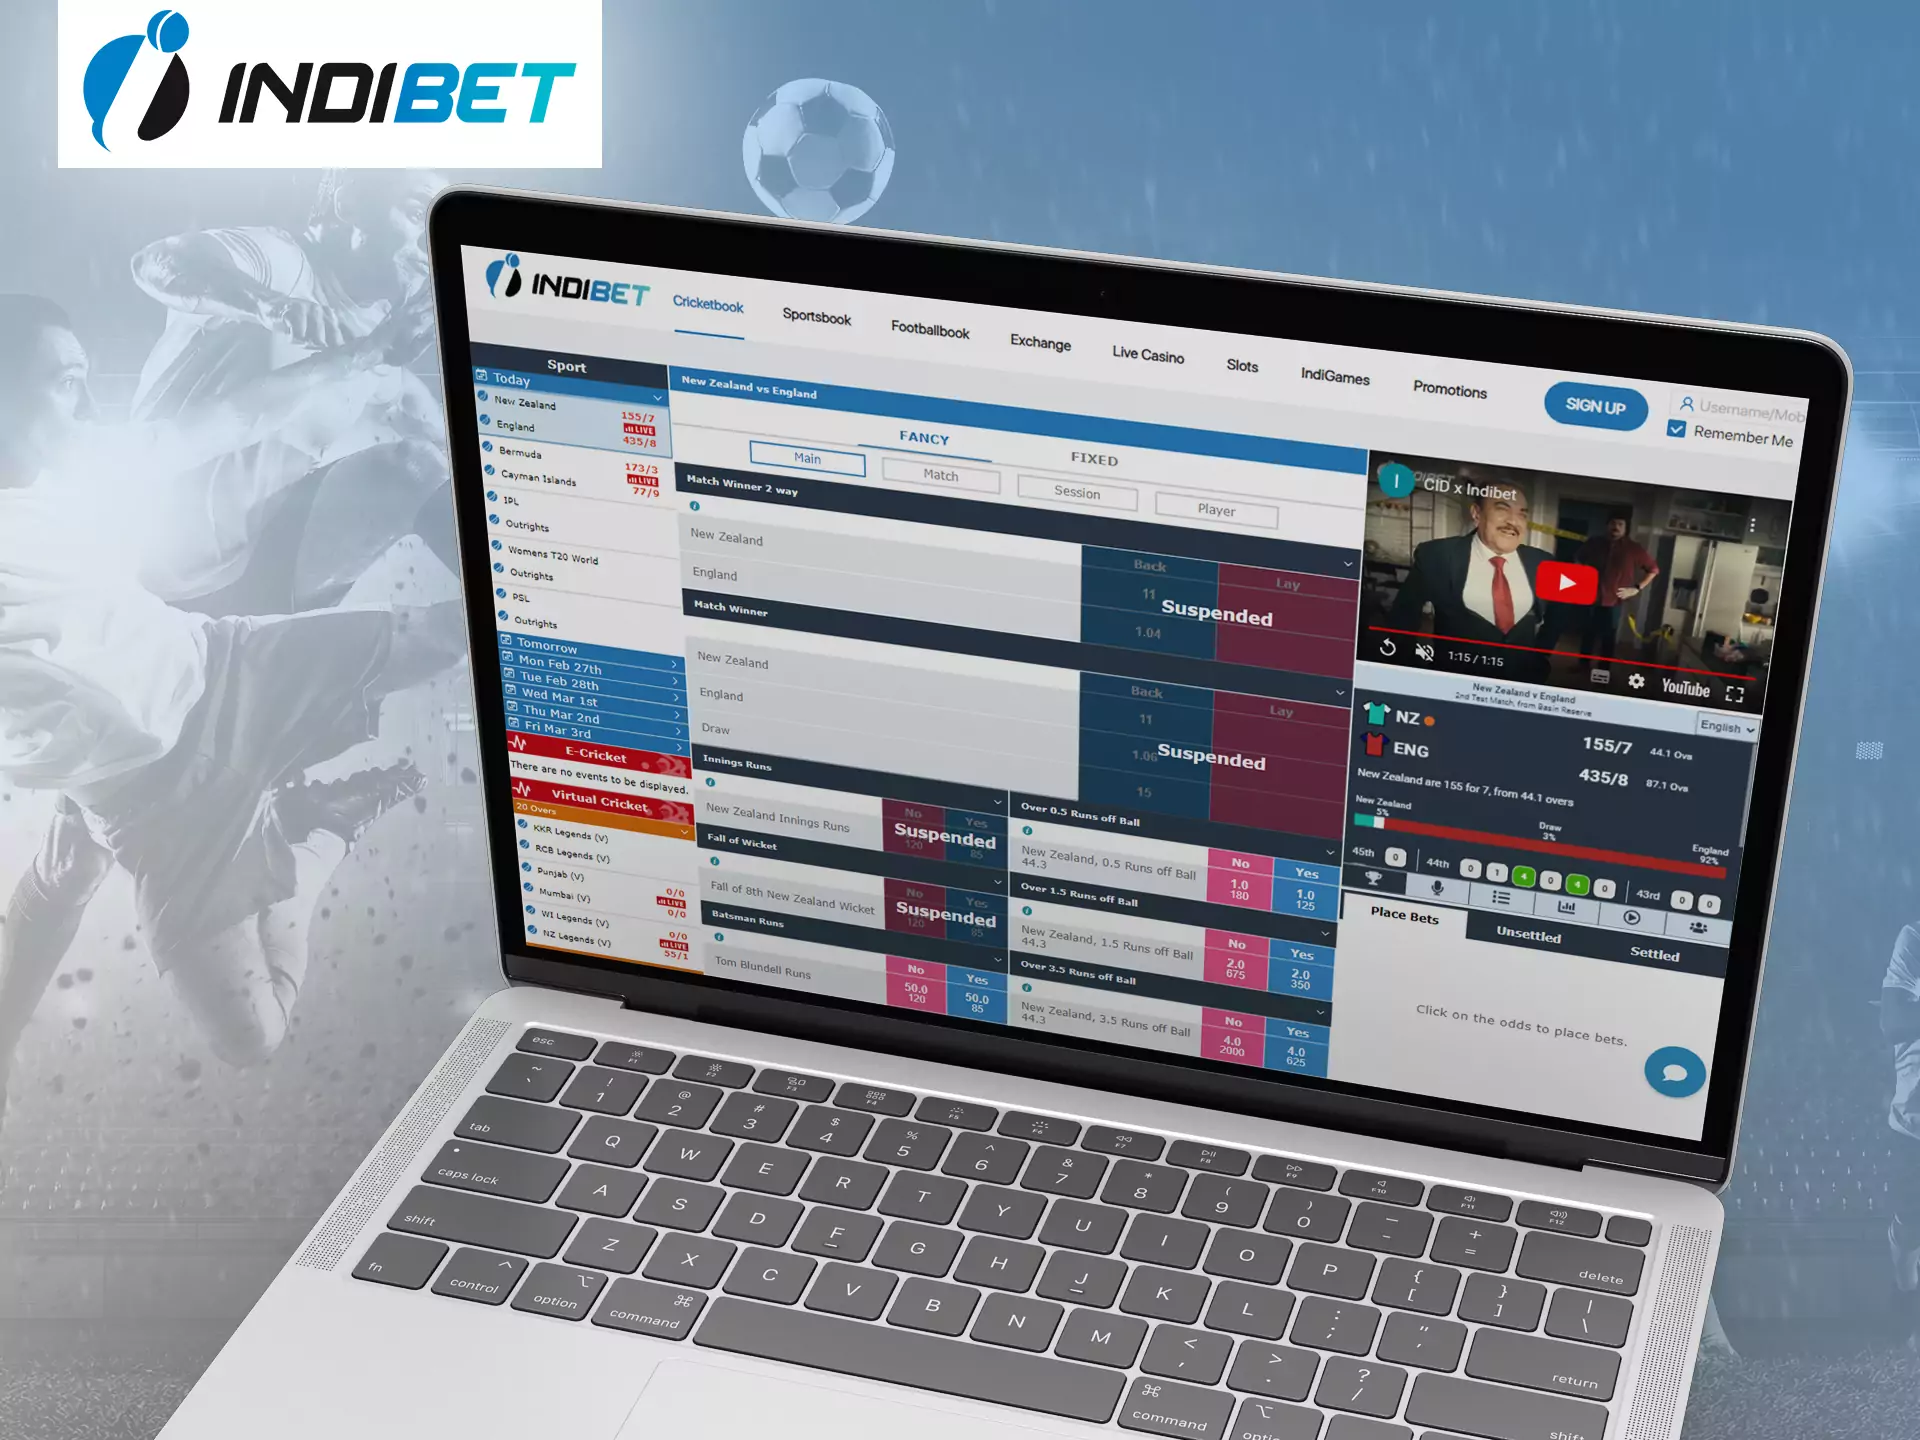 All betting features are available on the official Indibet website.